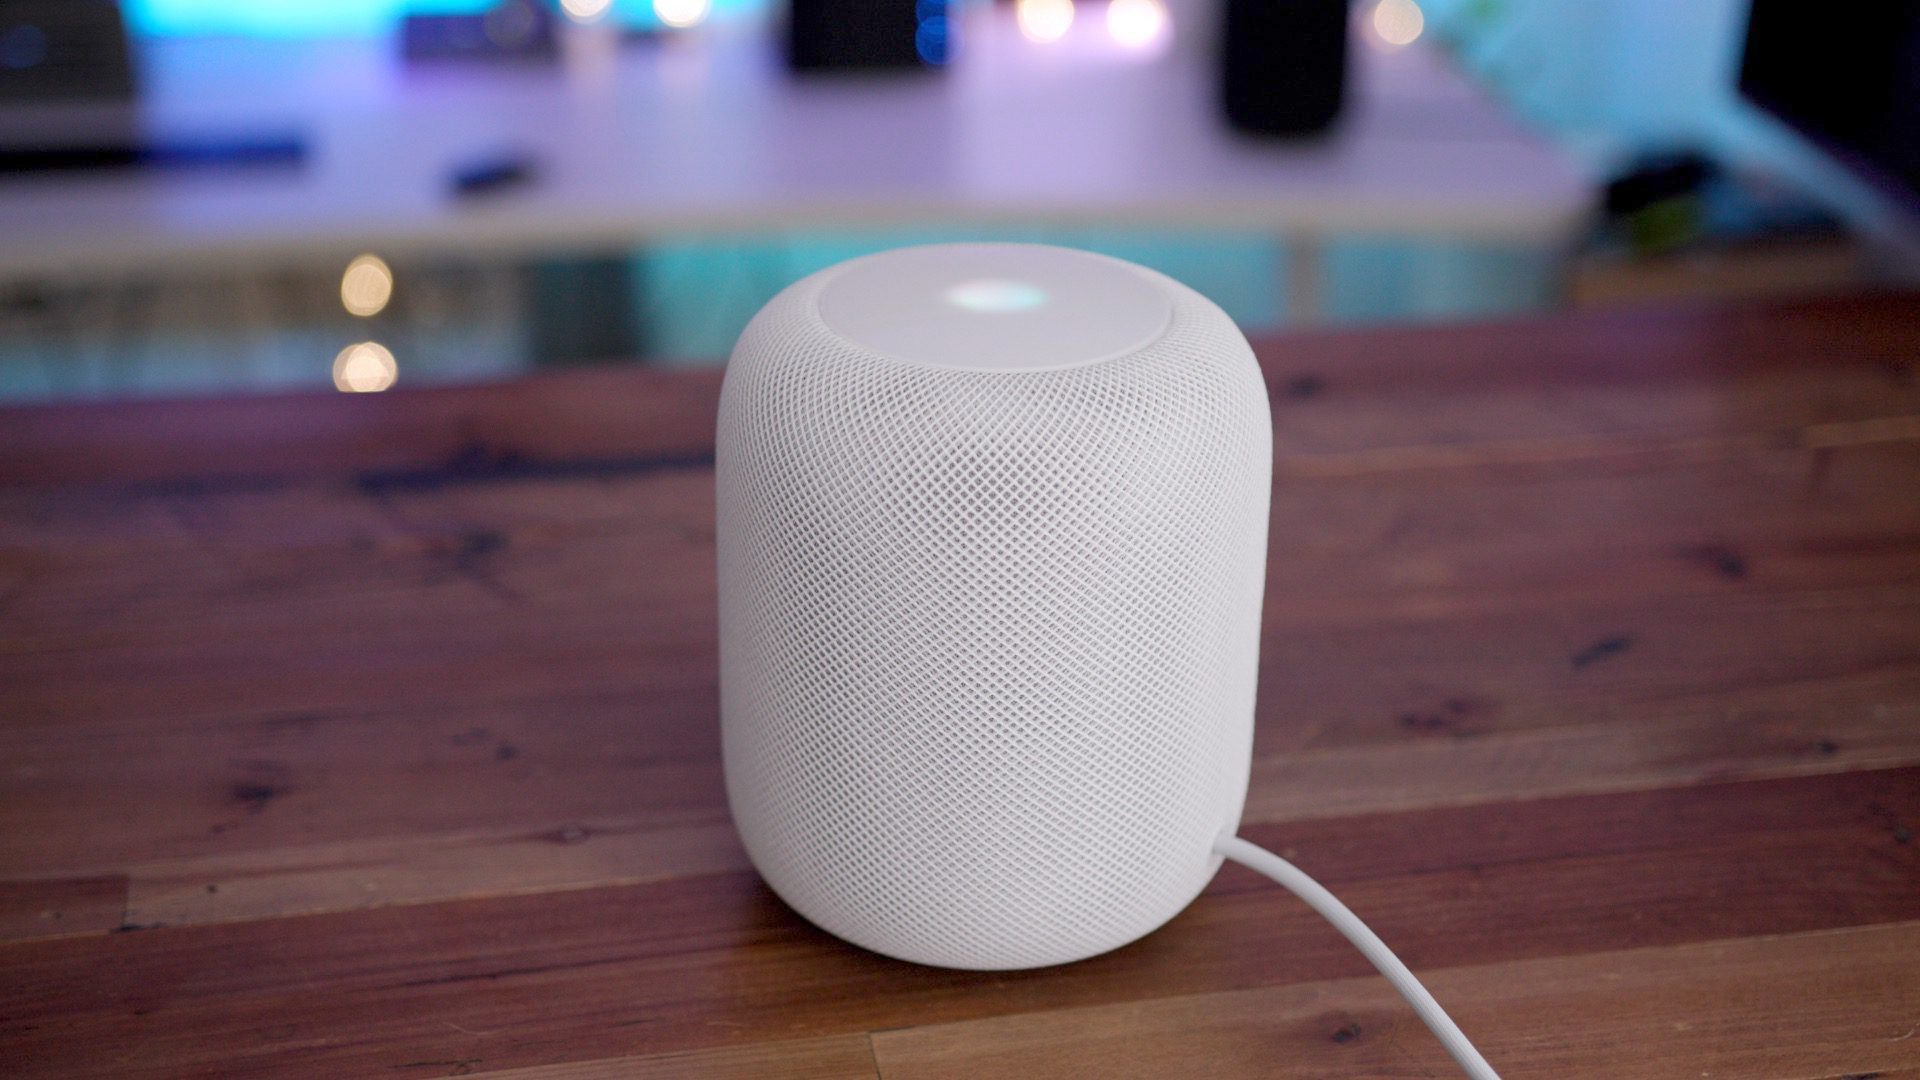 Three months after being discontinued, HomePod still available 